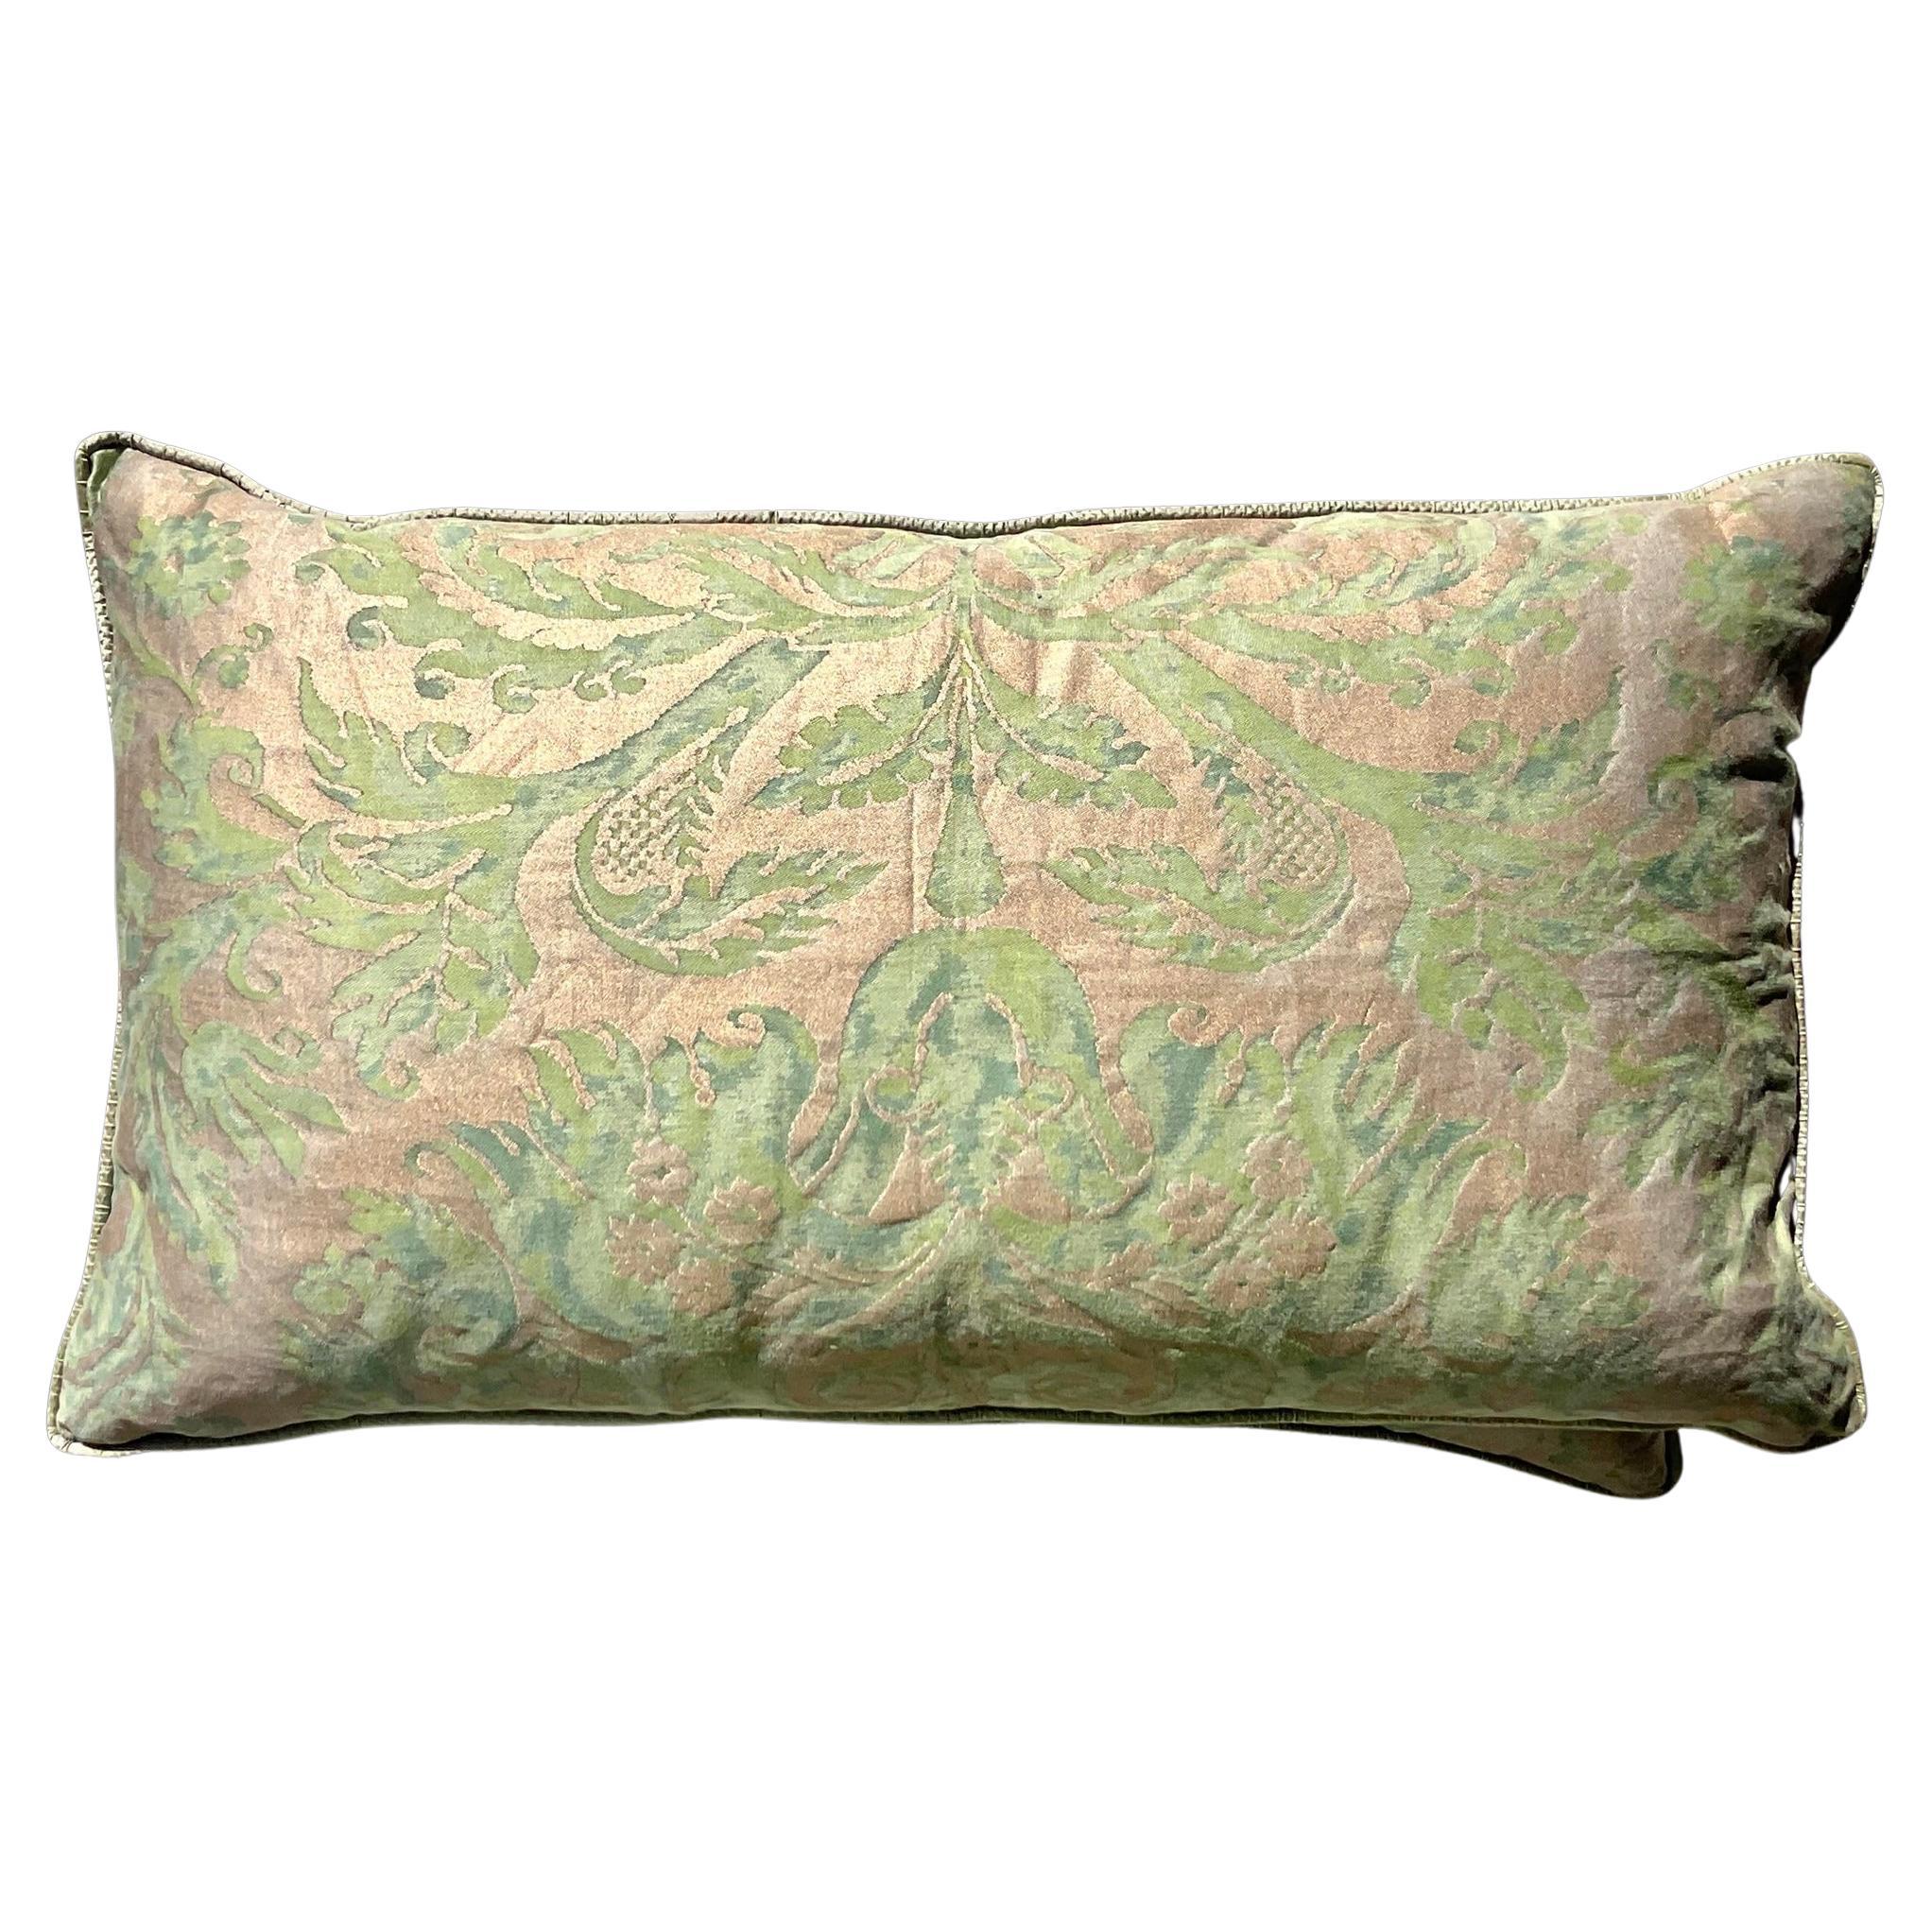 Vintage Regency Fortuny Brocade Throw Pillows, Set of Two